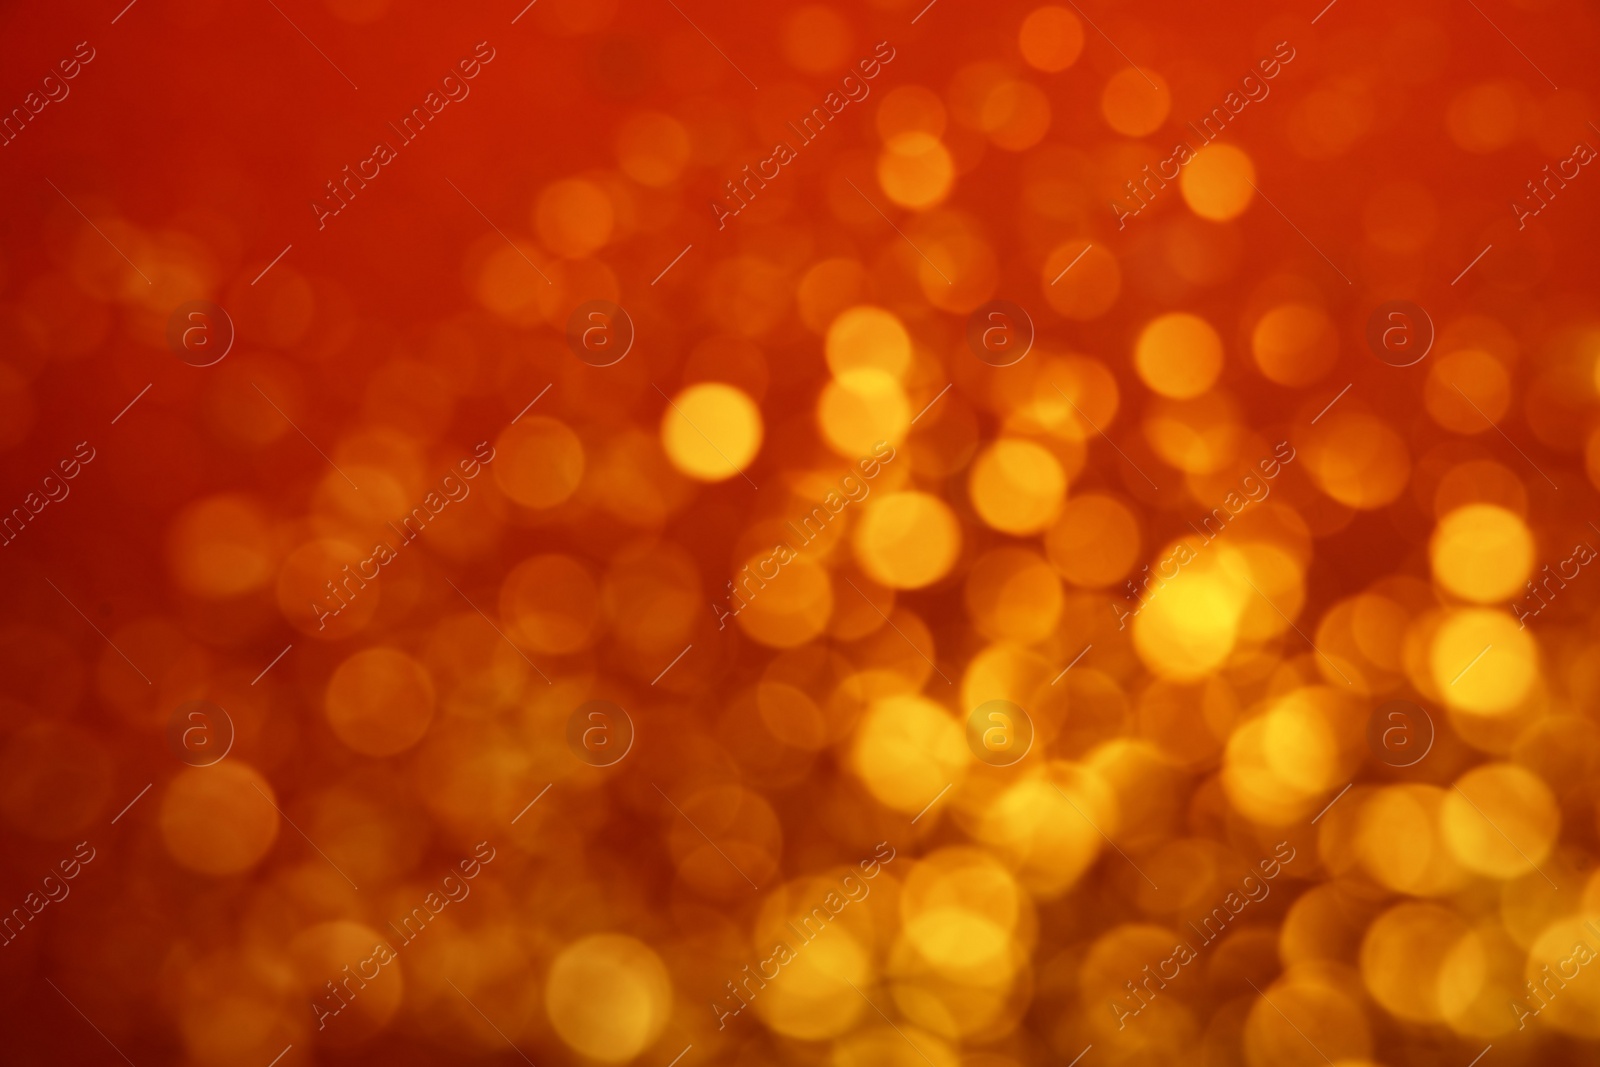 Photo of Blurred view of golden lights on red background. Bokeh effect